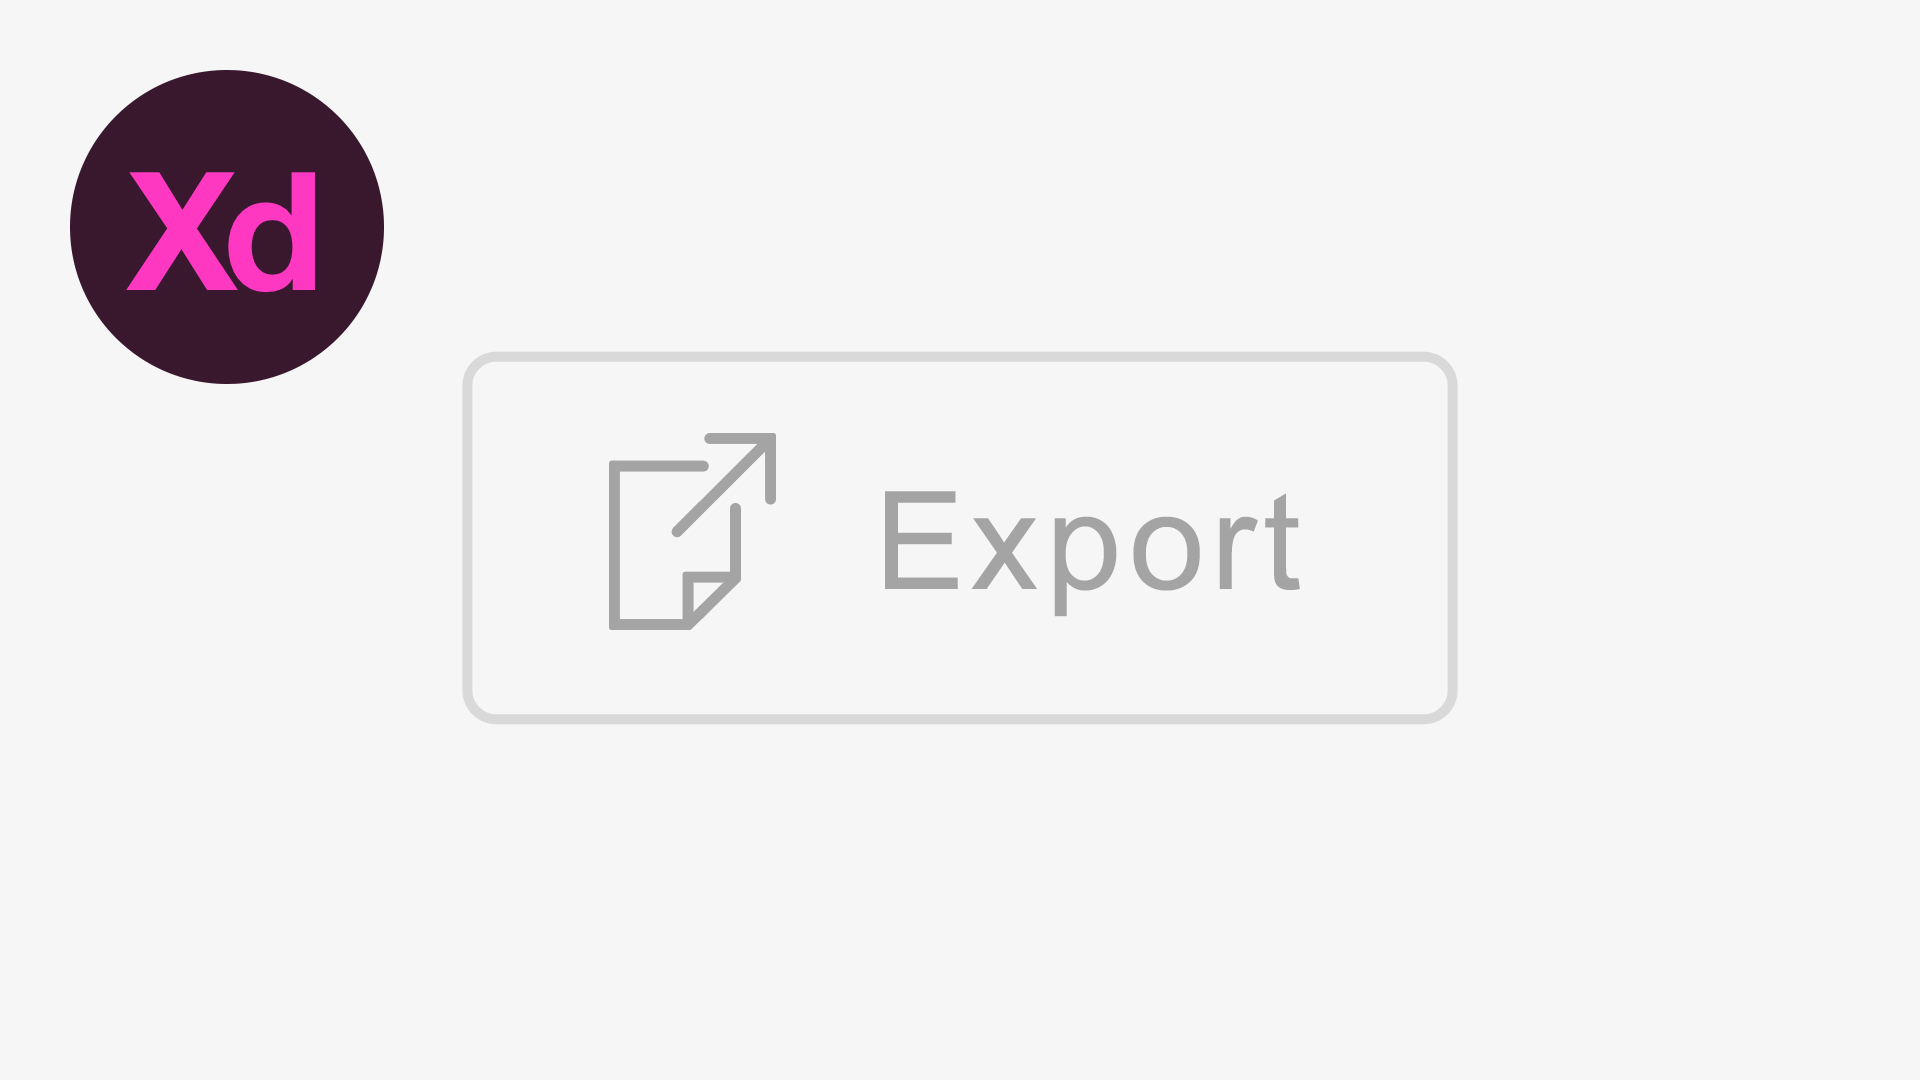 Learn How to Export Assets in Adobe XD